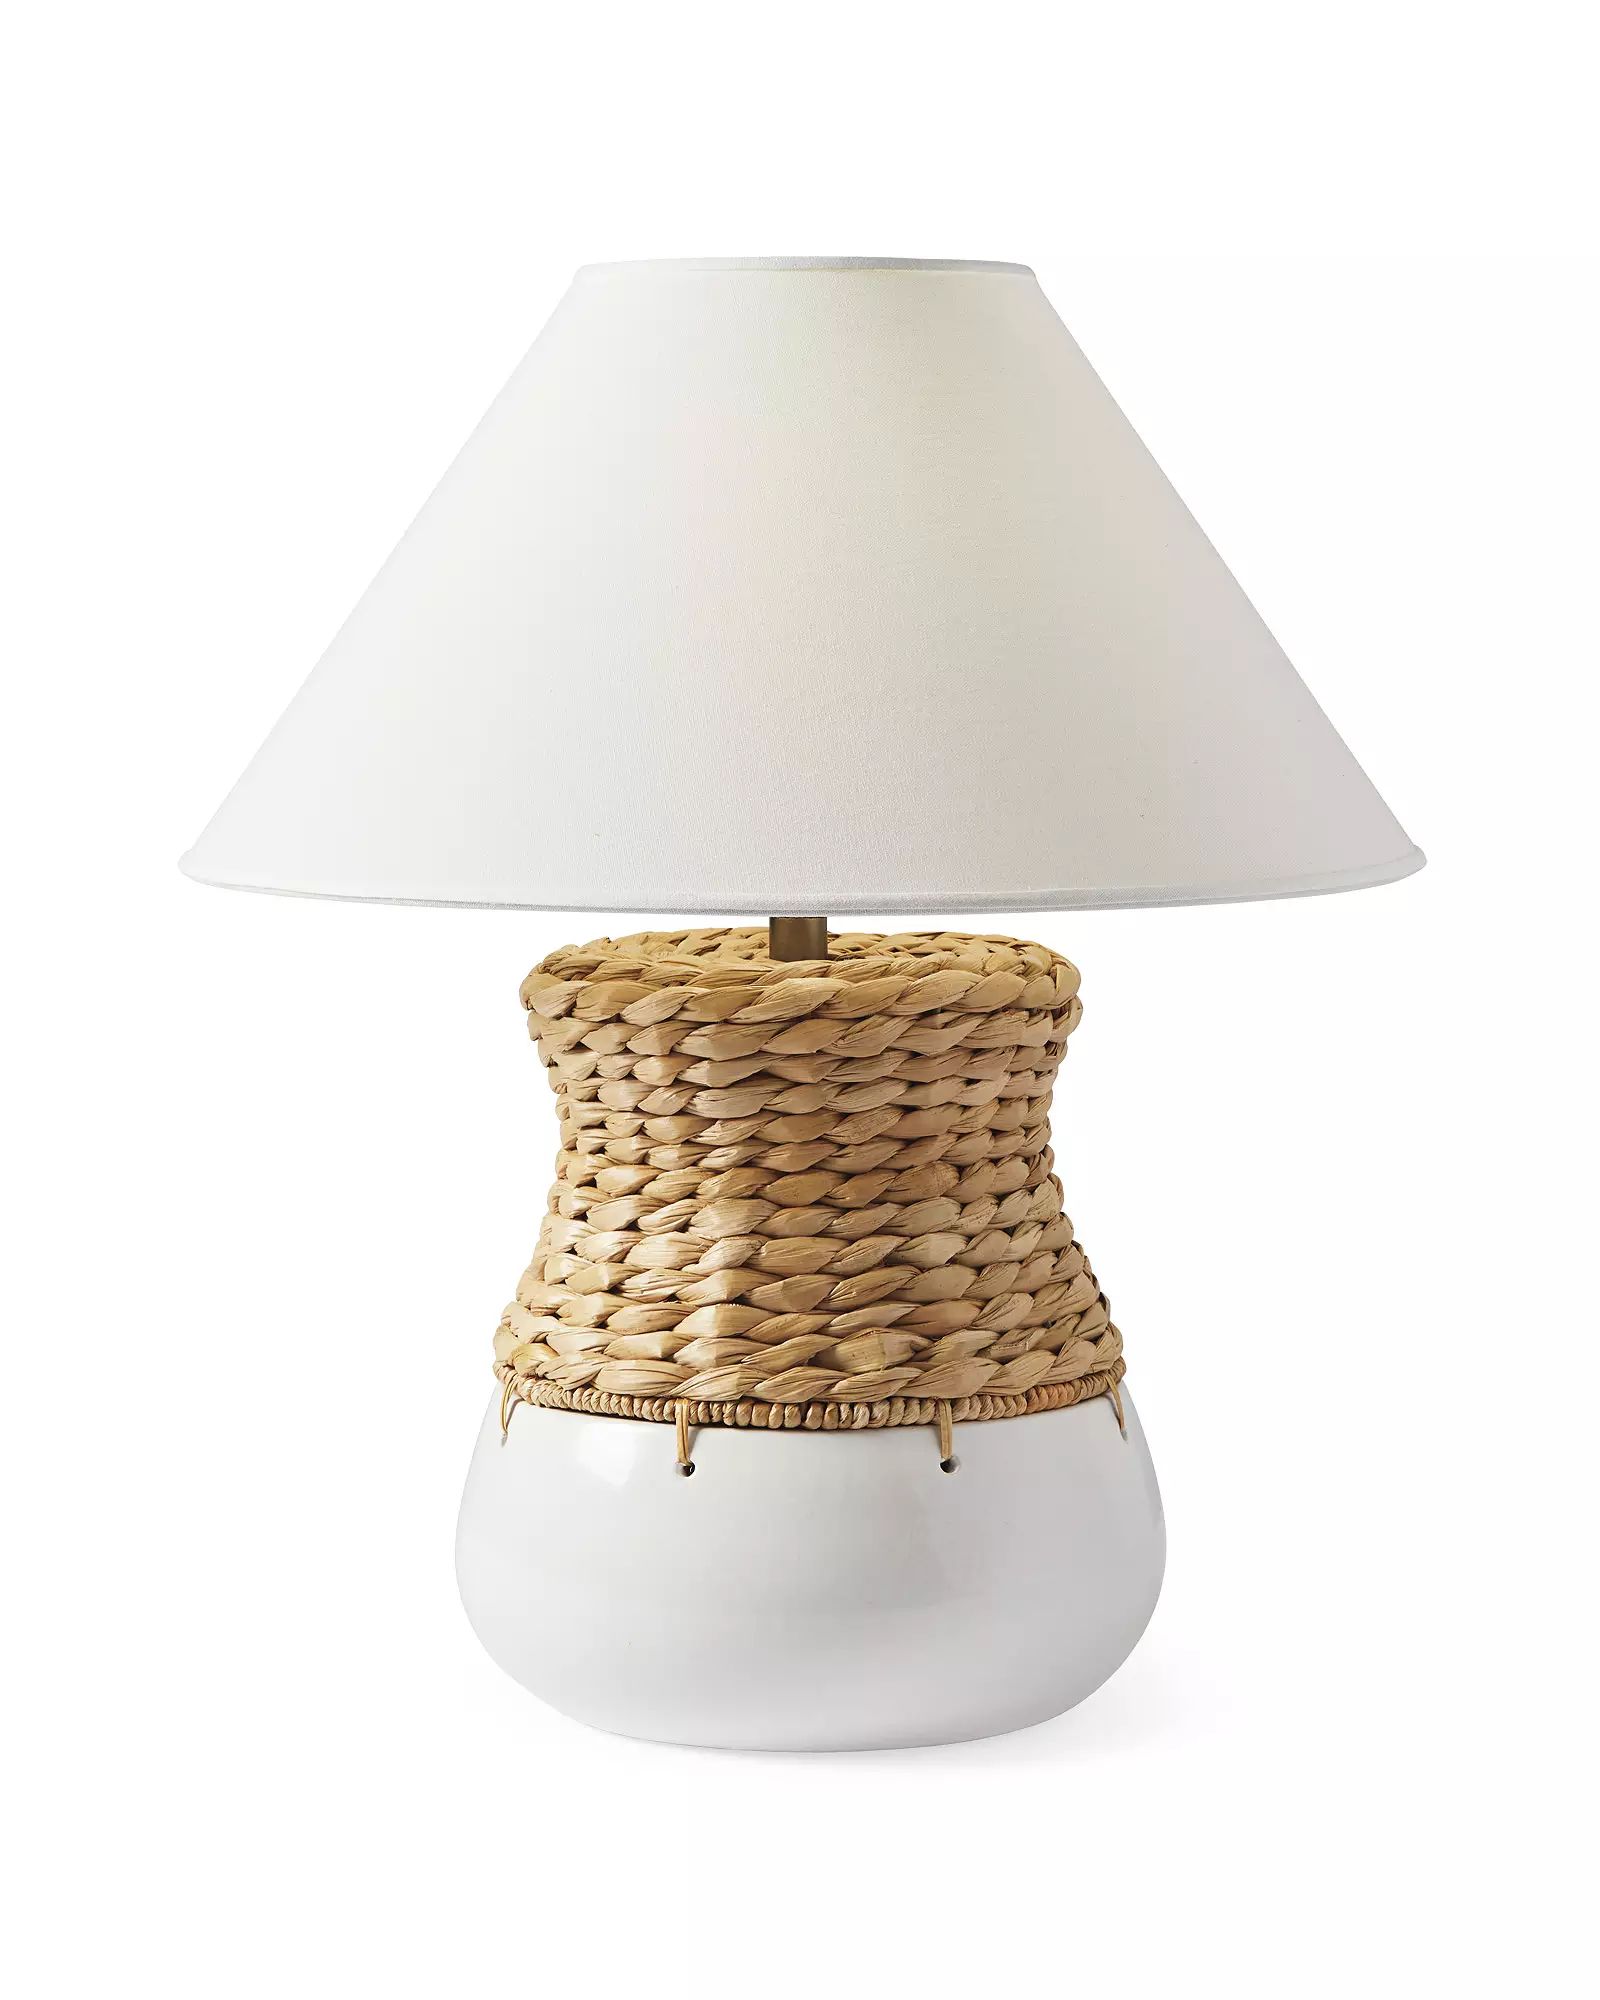 Kingston Table Lamp - Round | Serena and Lily